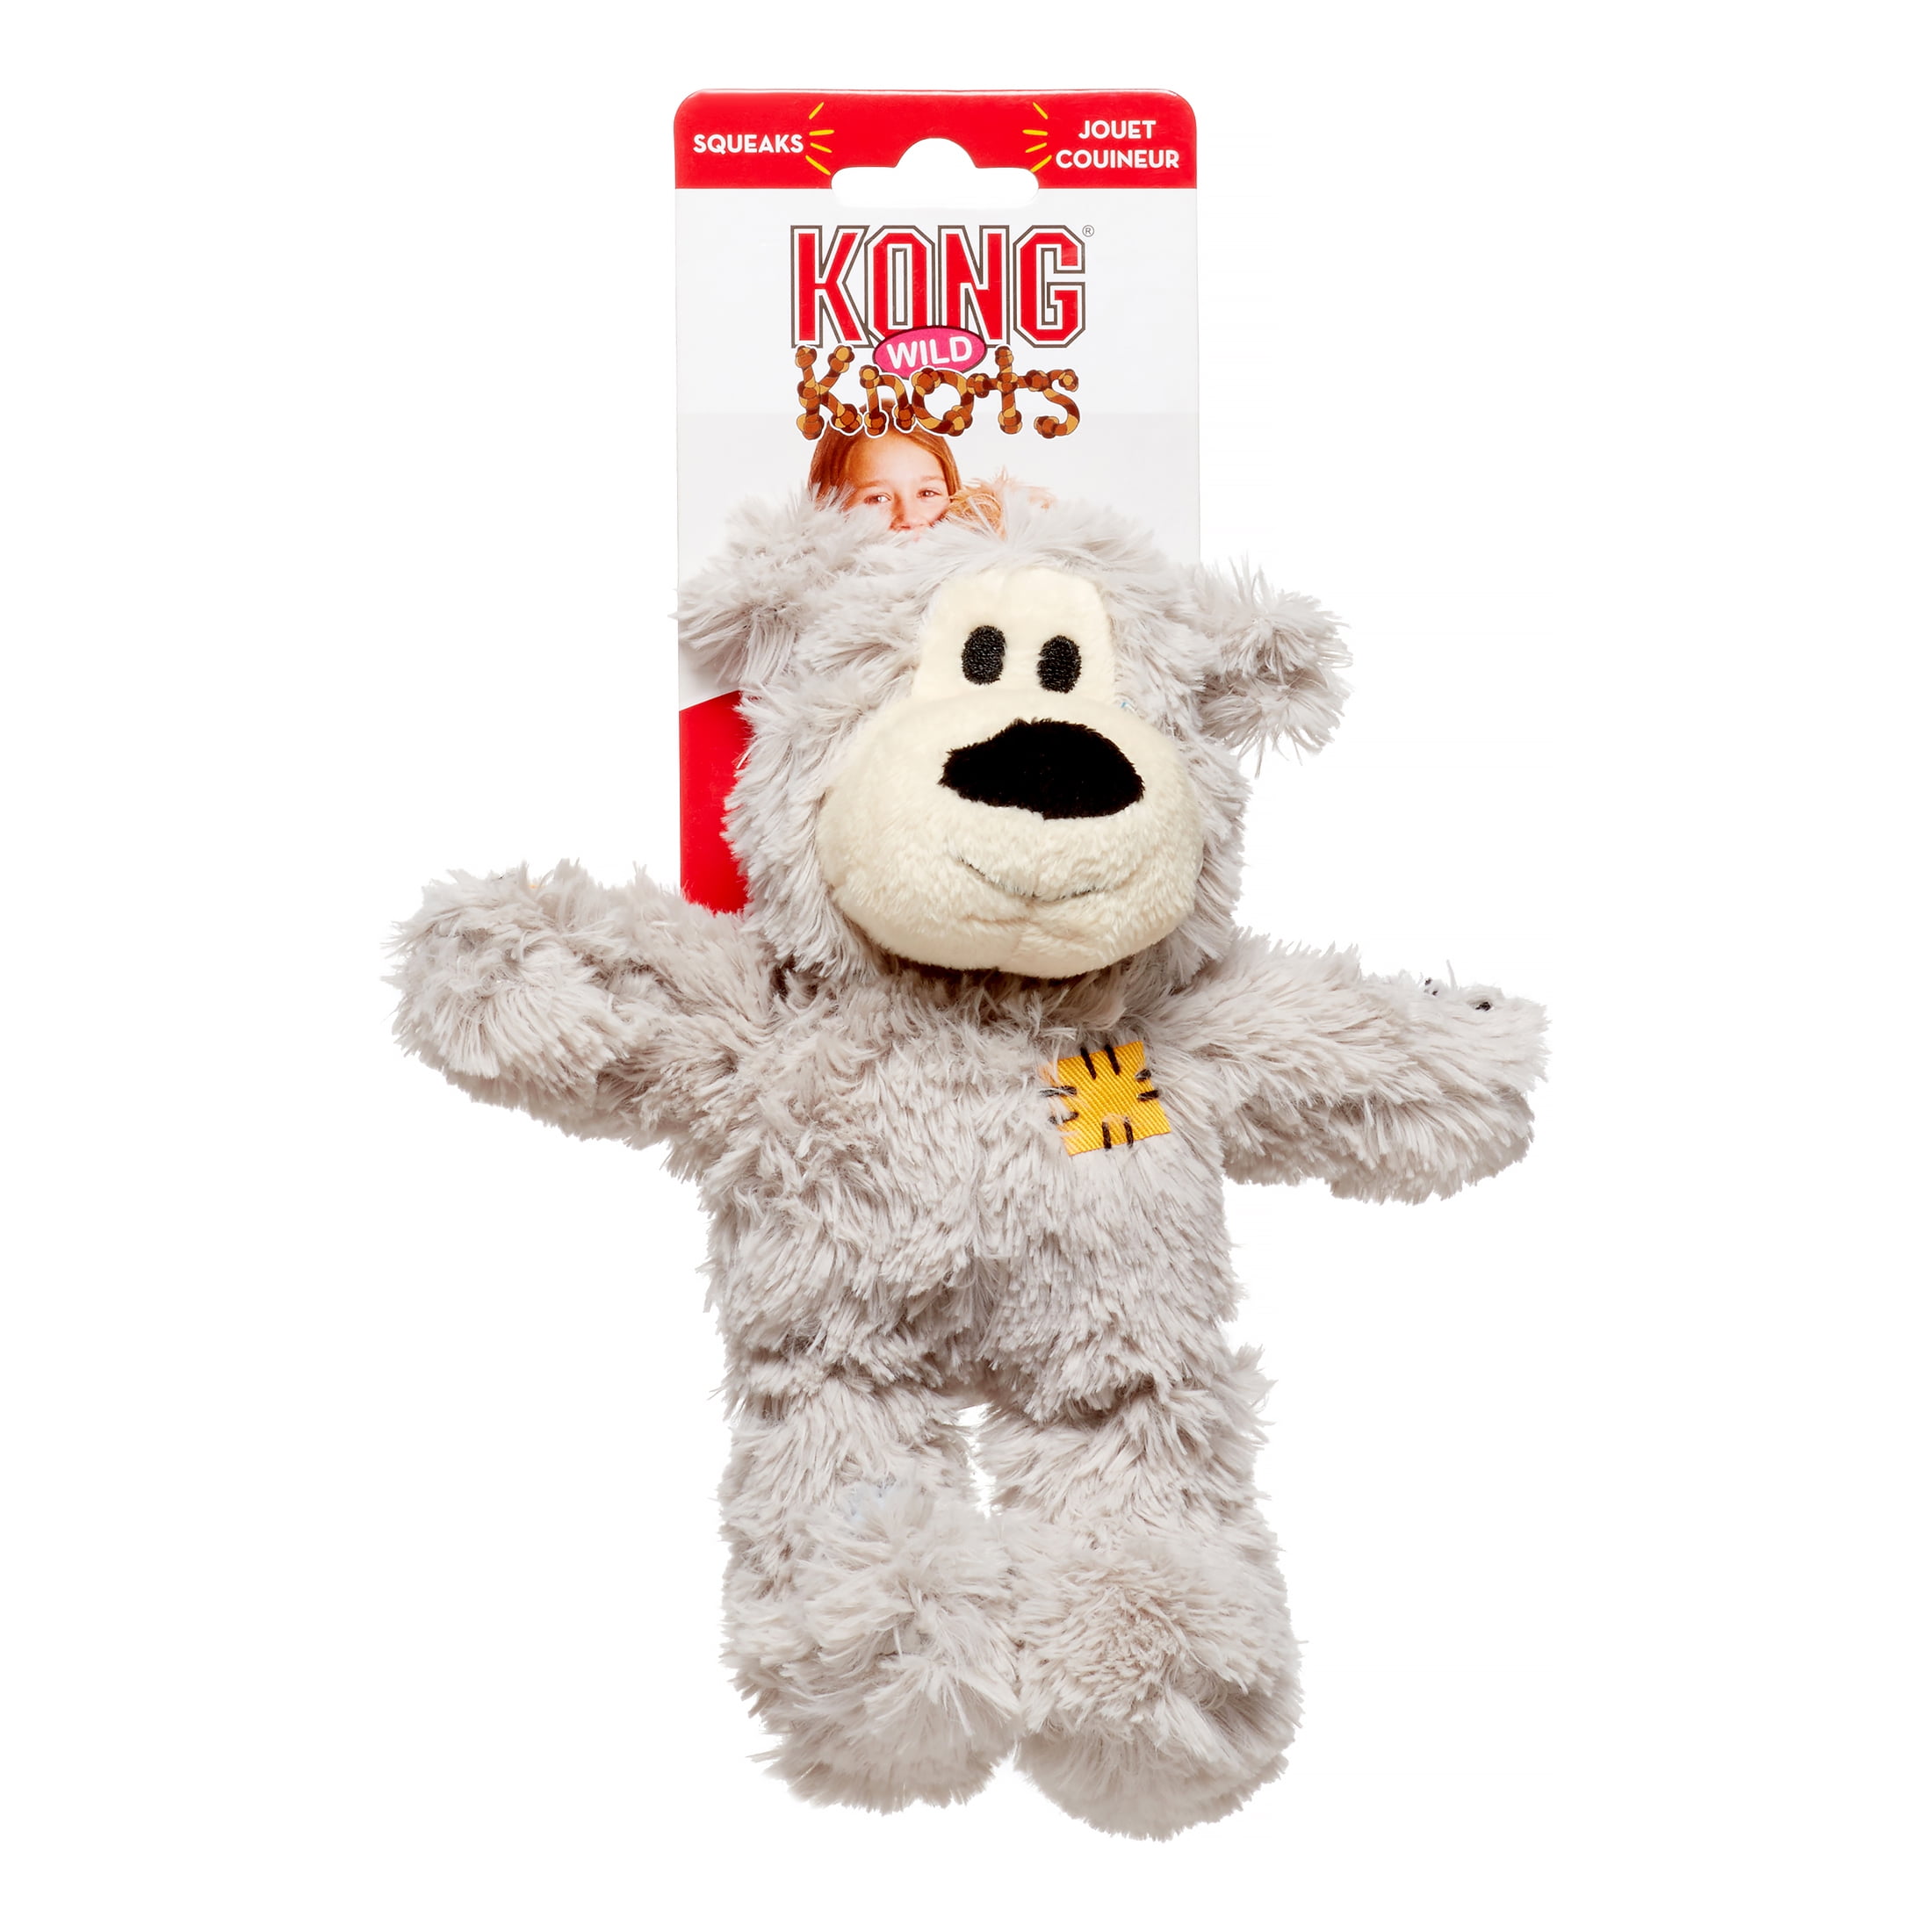 KONG Wild Knots Squeaker Bear for Dogs Small/Medium Colors Vary 